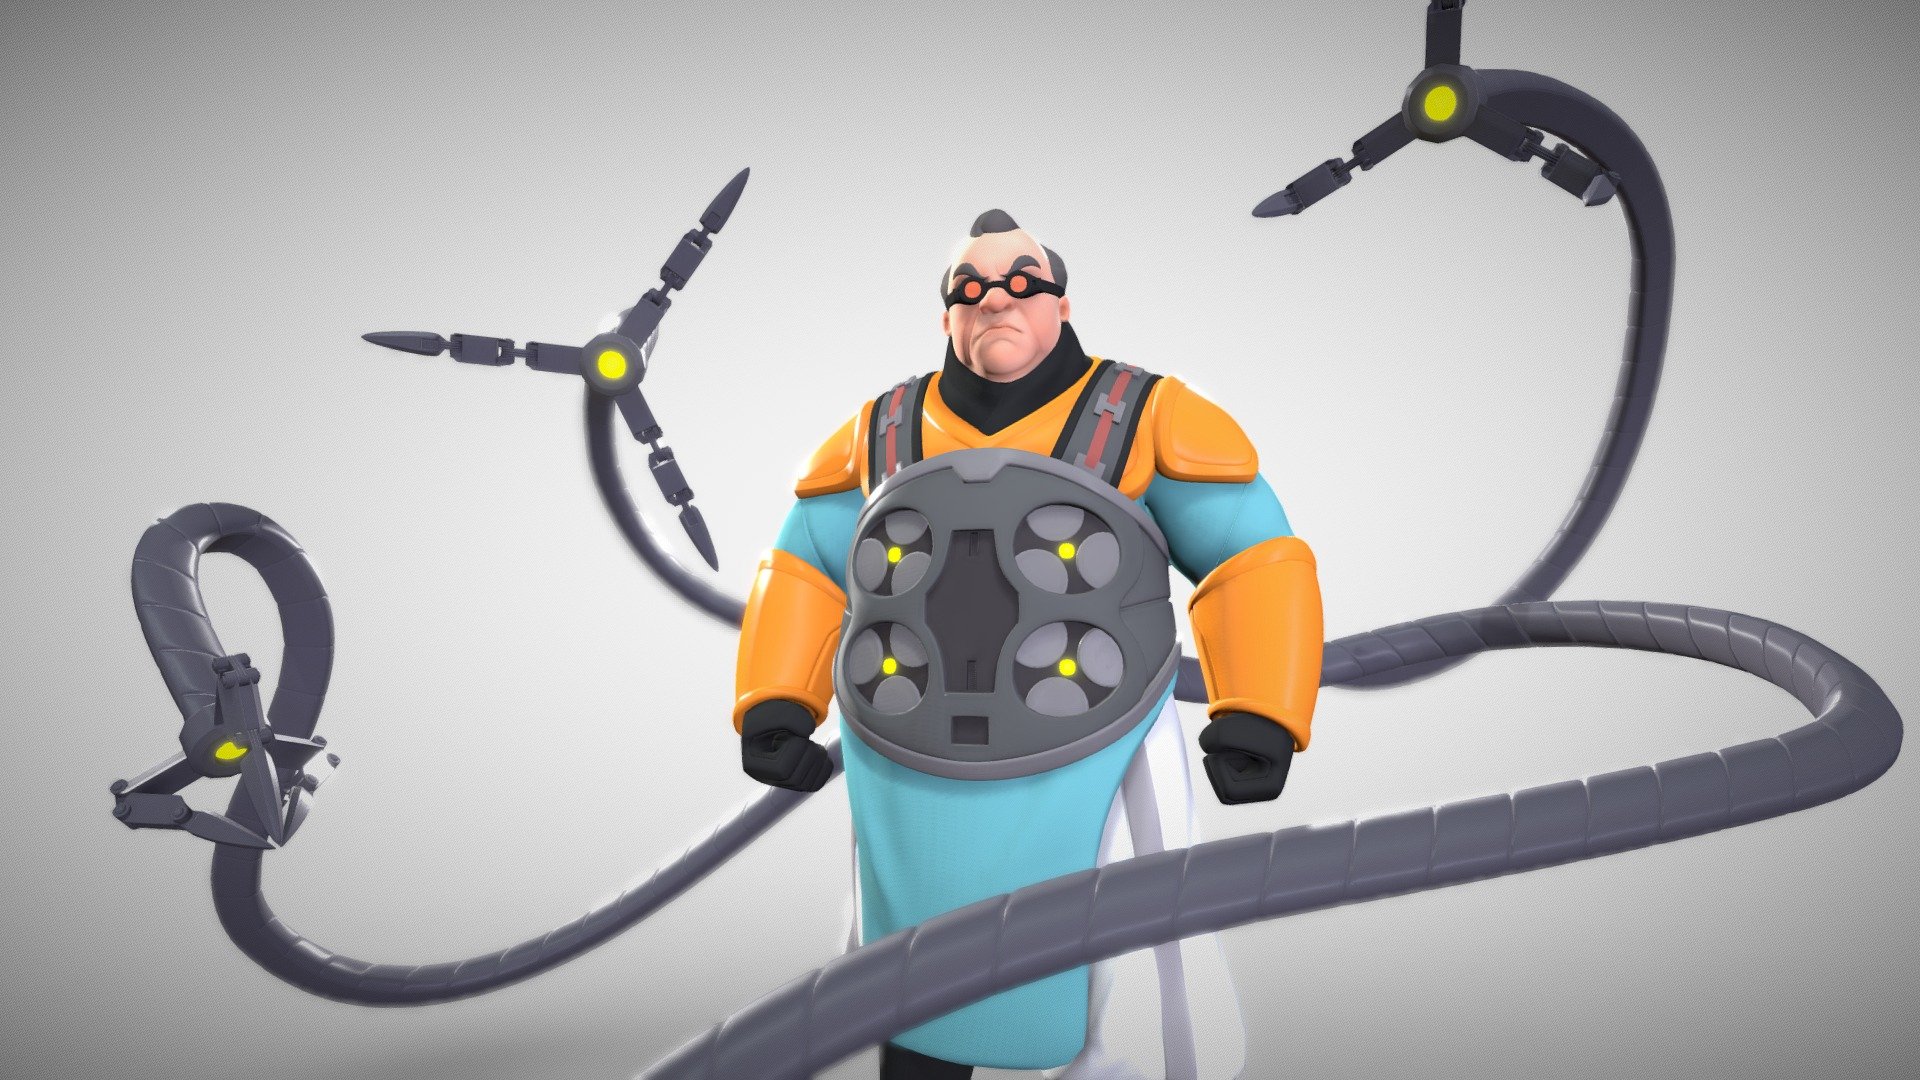 Otto Octavius alias Doctor Octopus, revisited in Disney Infinity style.
Inspired by a beautiful illustration by Valerio Buonfantino https://www.artstation.com/artwork/aRgAz0 - Doctor Octopus - 3D model by Roberto Digiglio (@voilola) 3d model